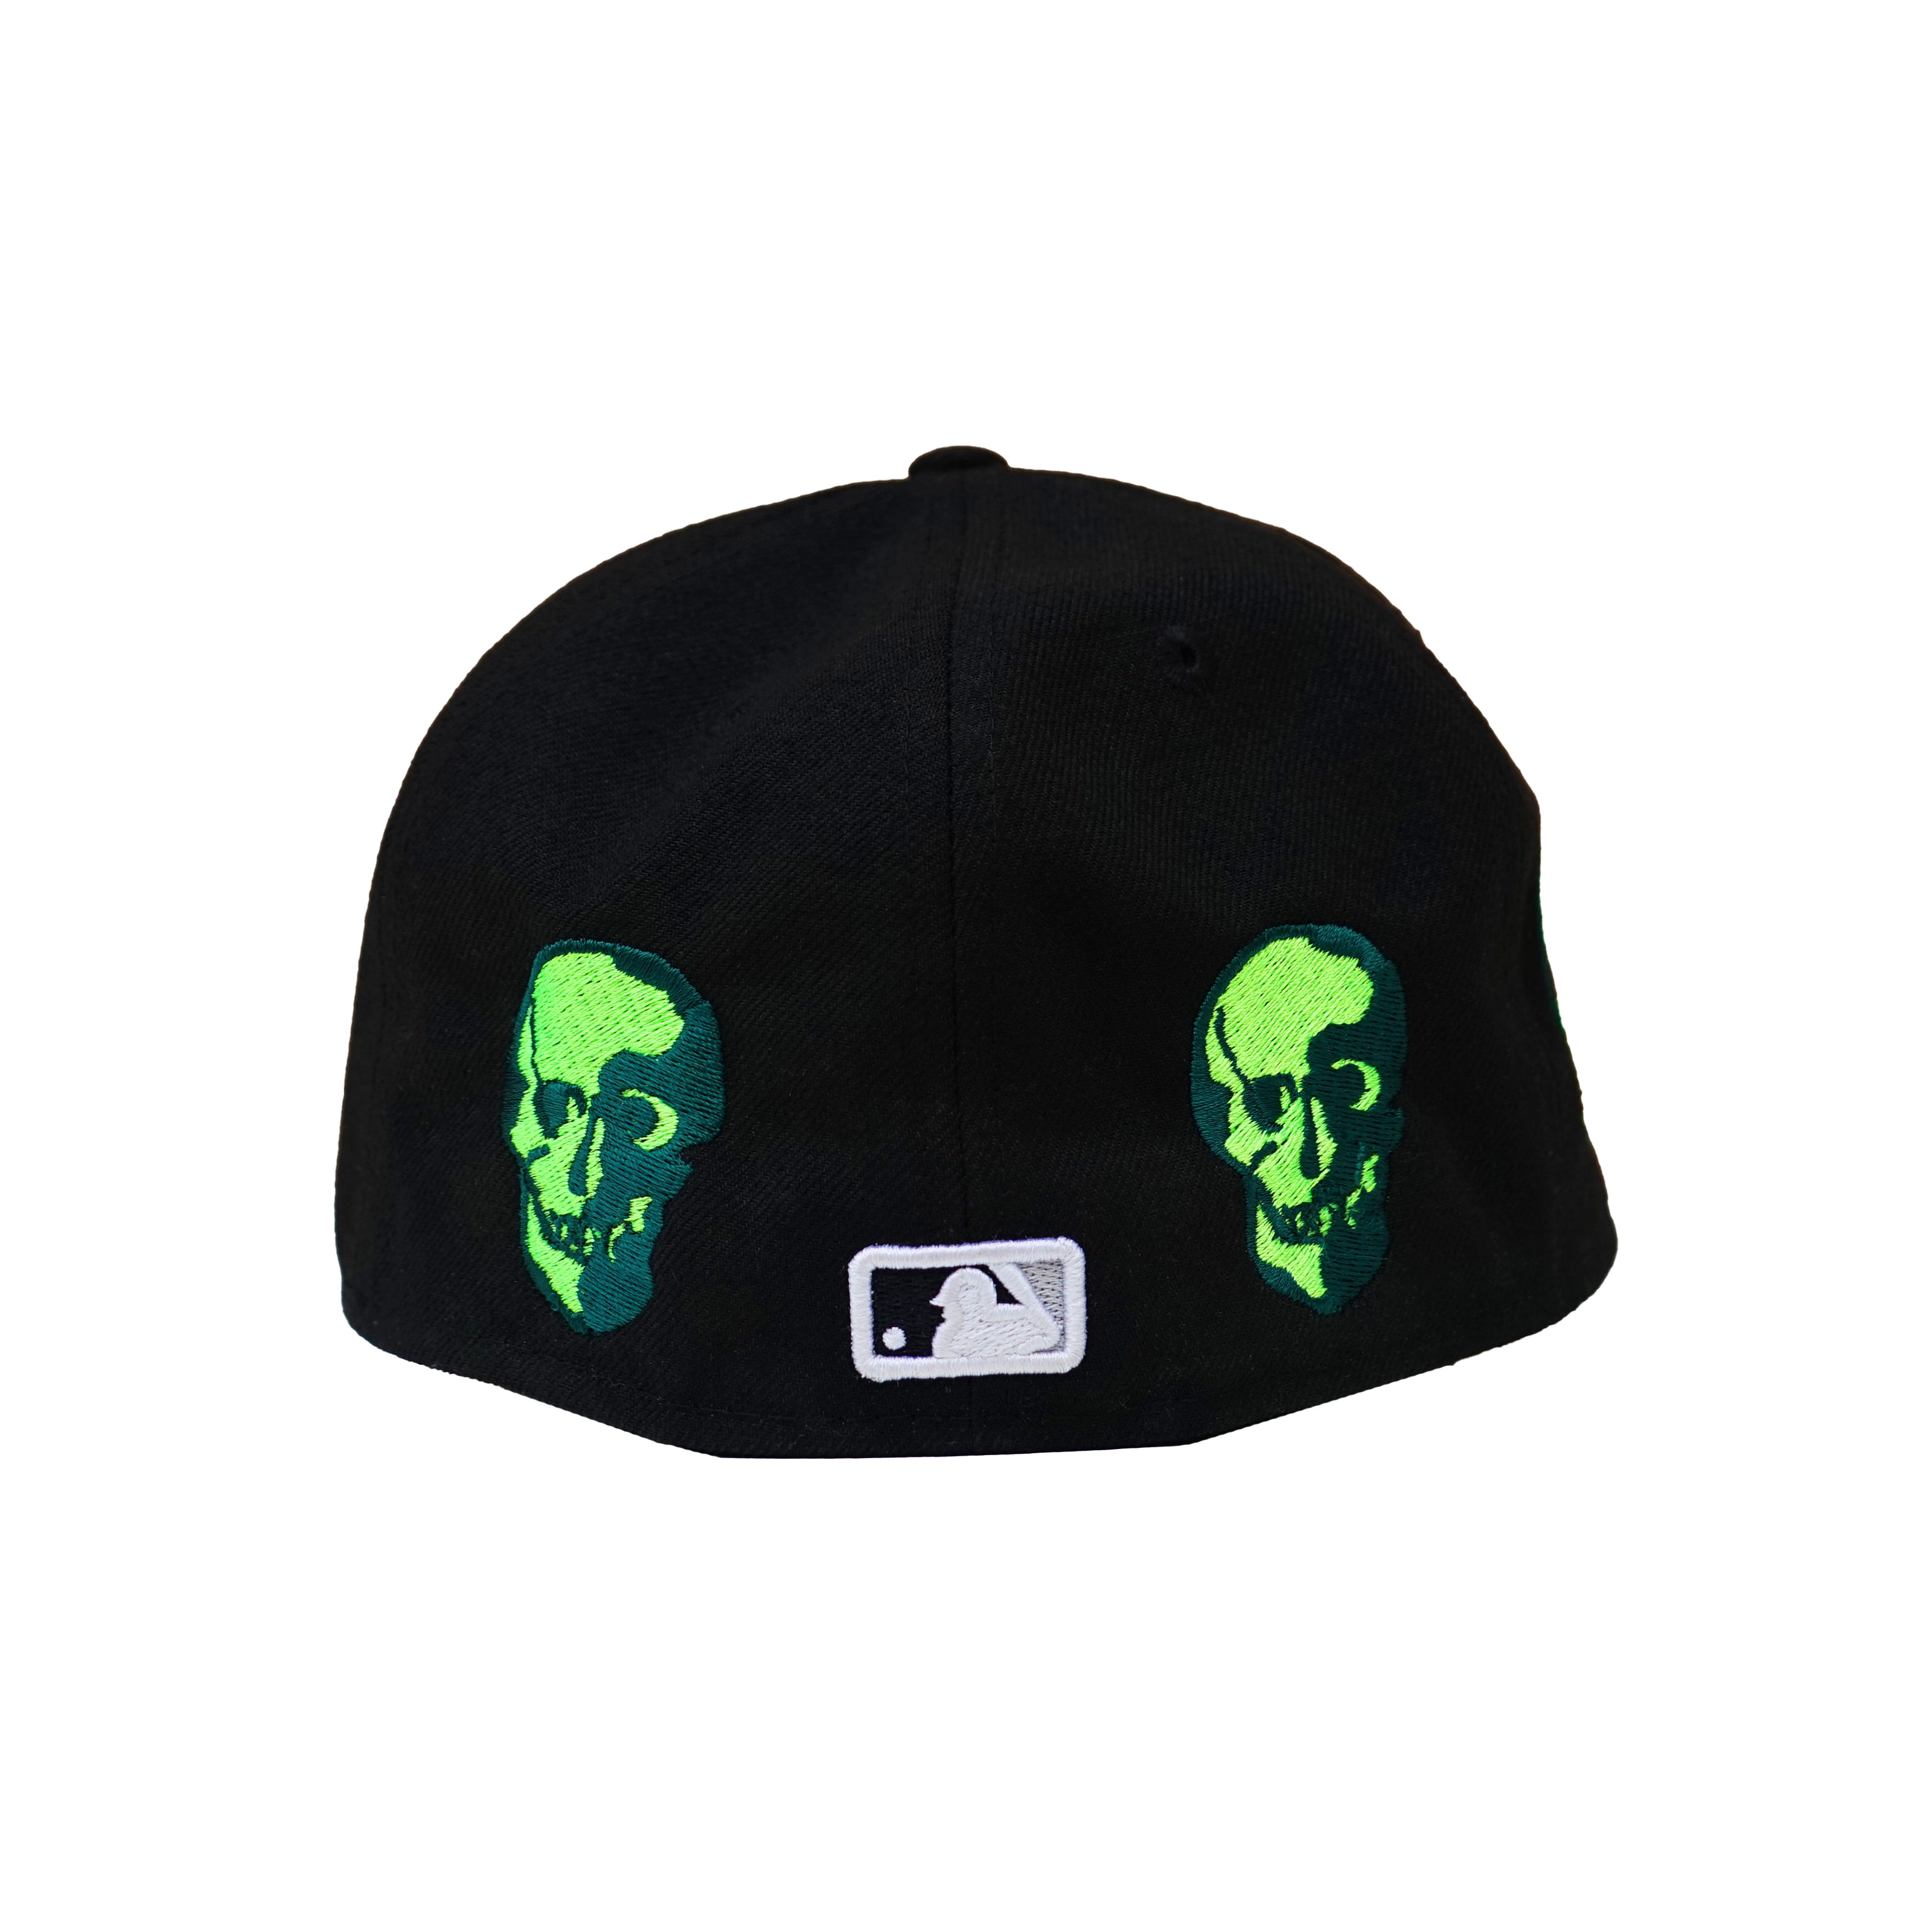 "Skull" White Sox Fitted Cap